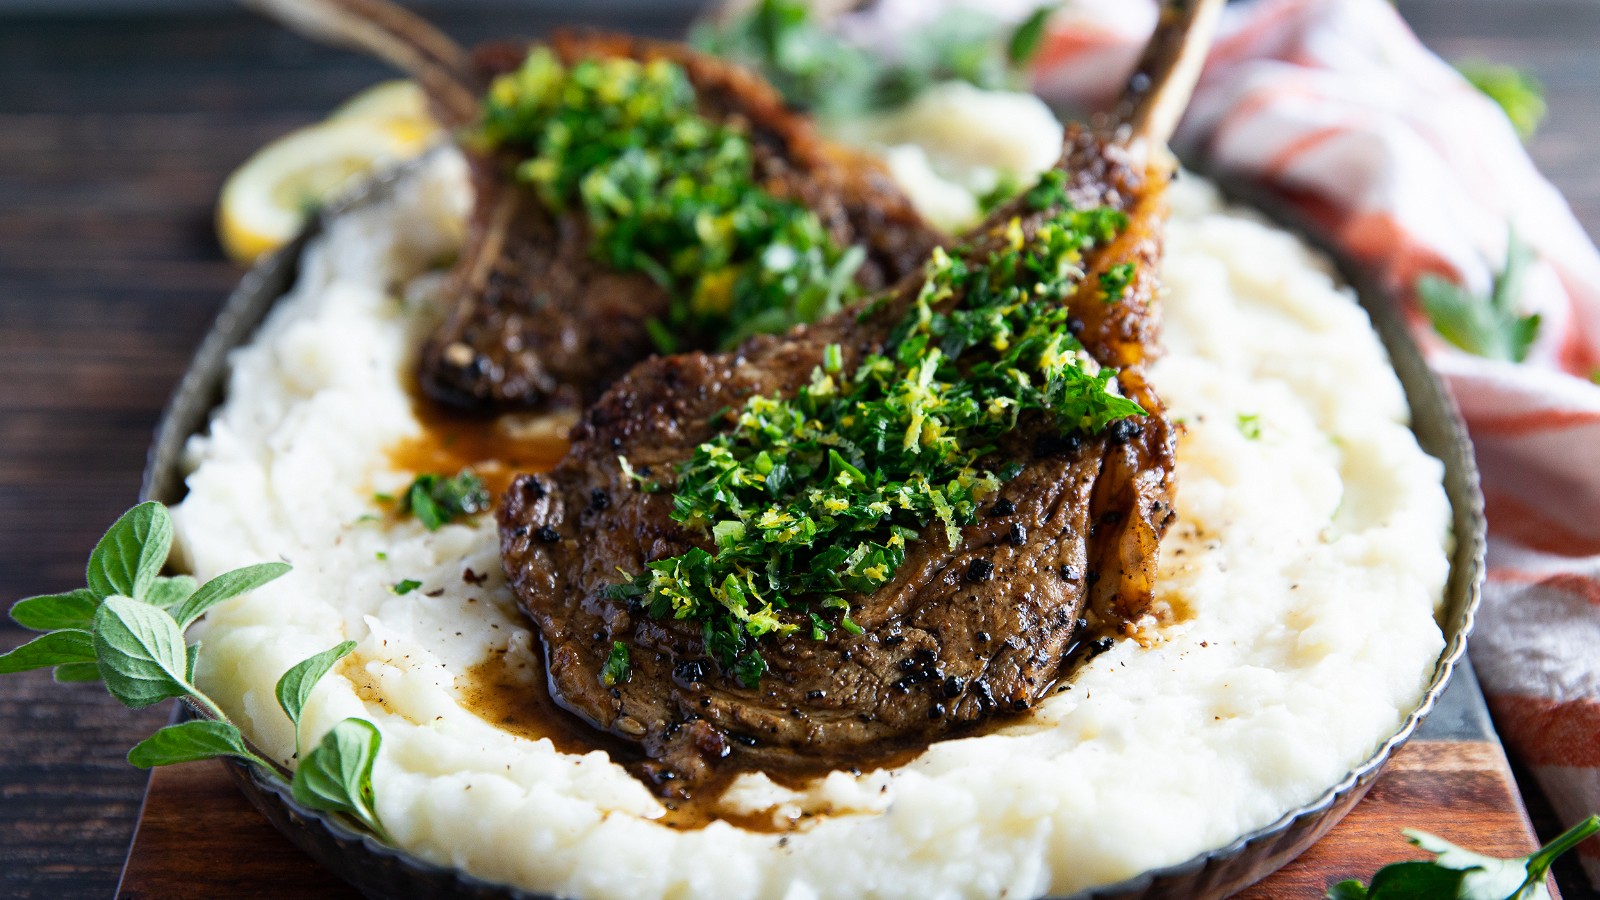 Image of Sealand Grilled Veal Chops with Gremolata